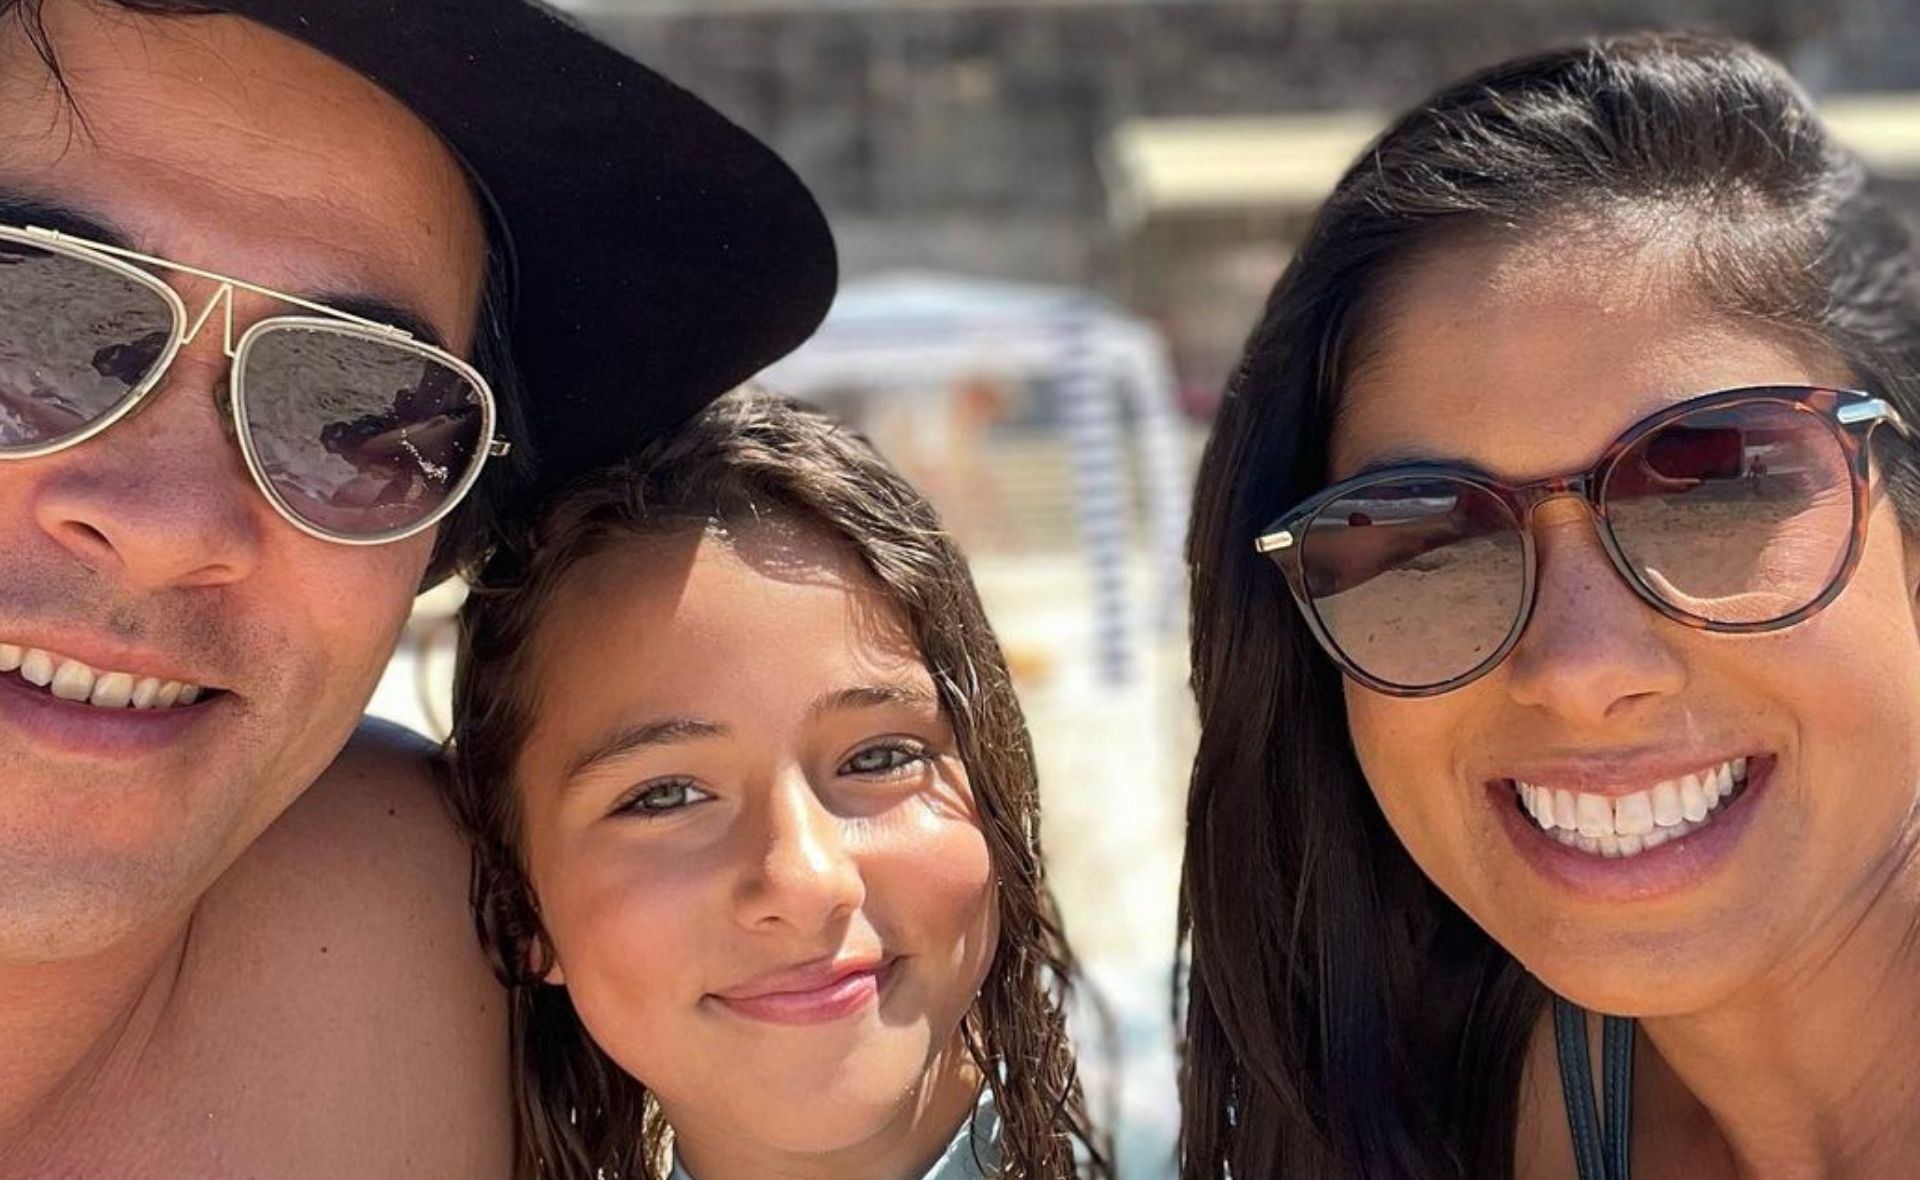 Home and Away’s James Stewart shares rare family snaps with his wife Sarah Roberts and his mini-me daughter Scout